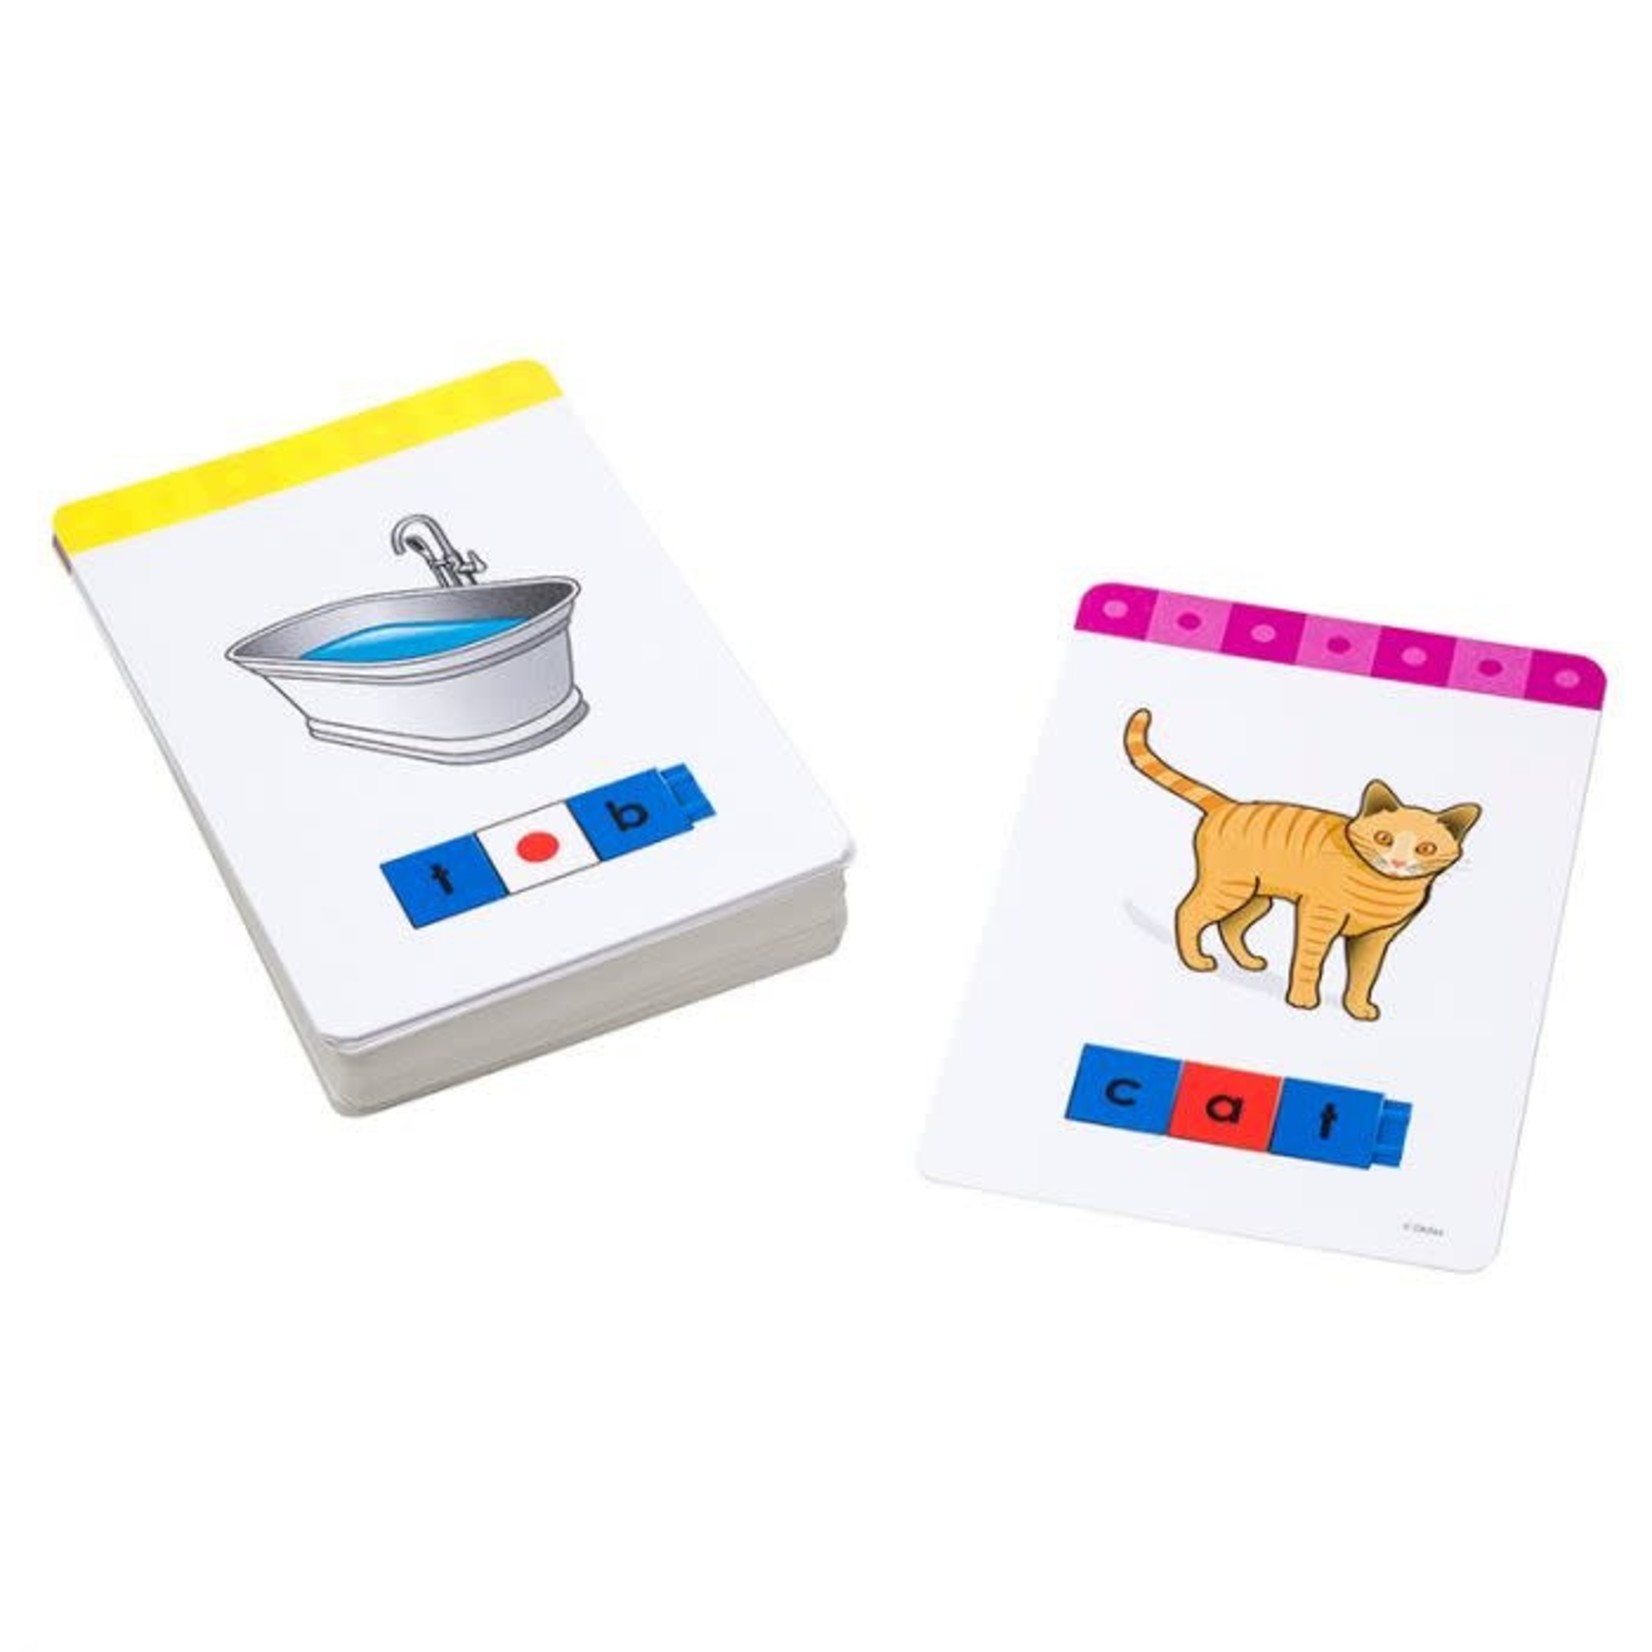 Unifix Reading: Early Phonics Word-Building Cards